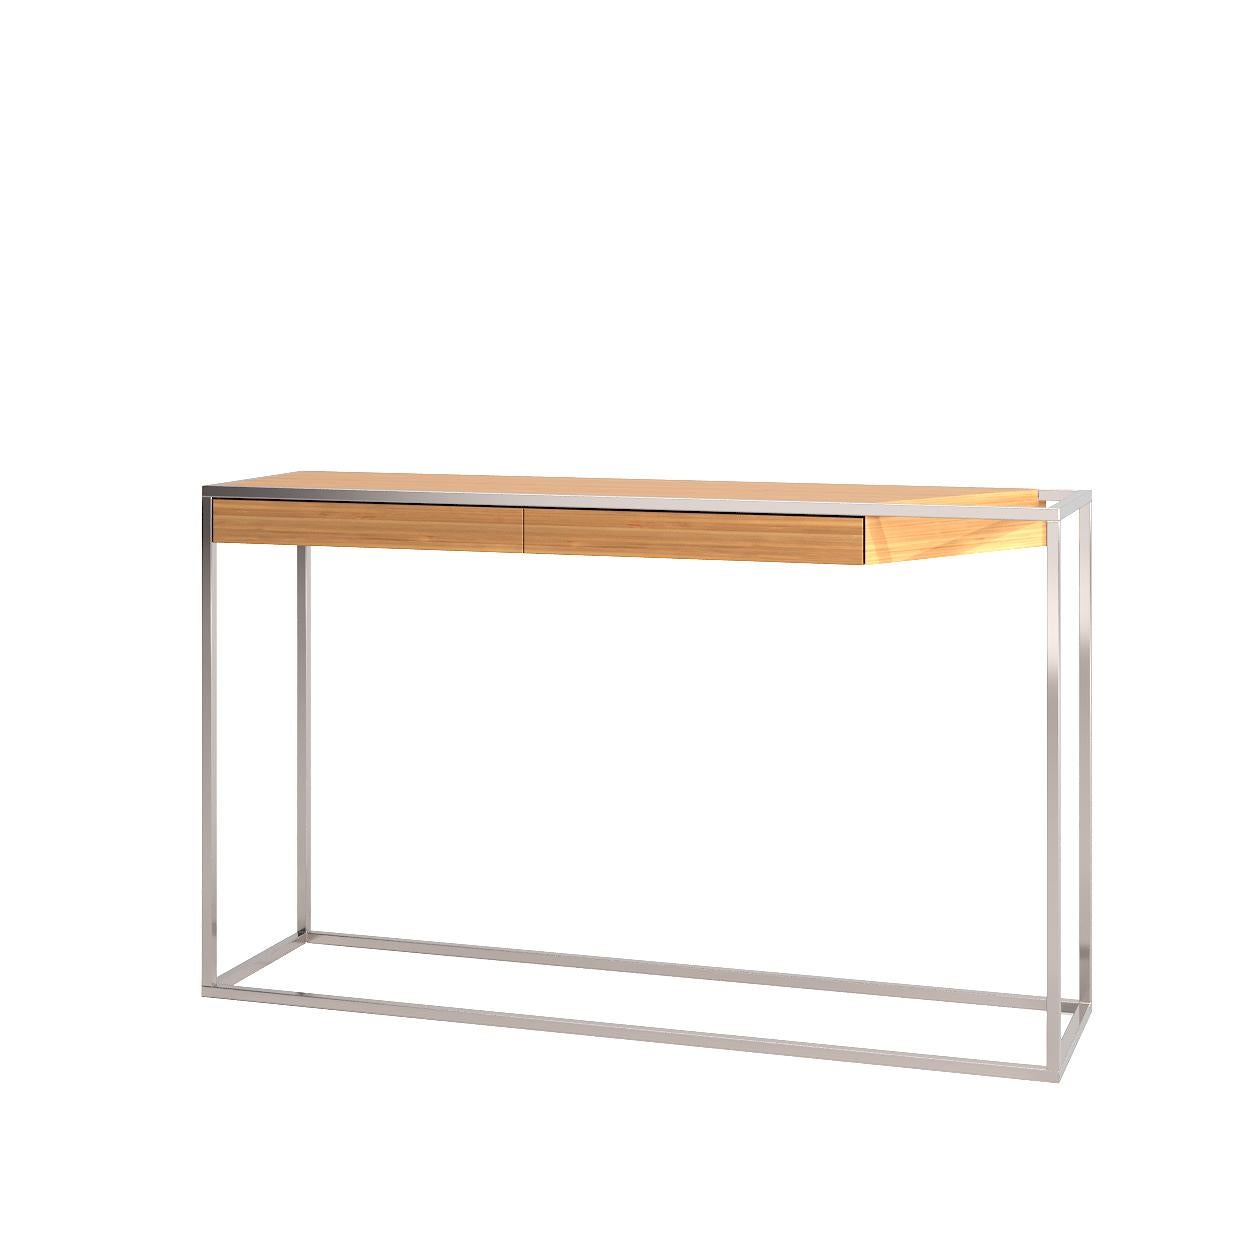 Portuguese Modern Minimalist Rectangular Console Table Oak Wood and Brushed Stainless Steel For Sale